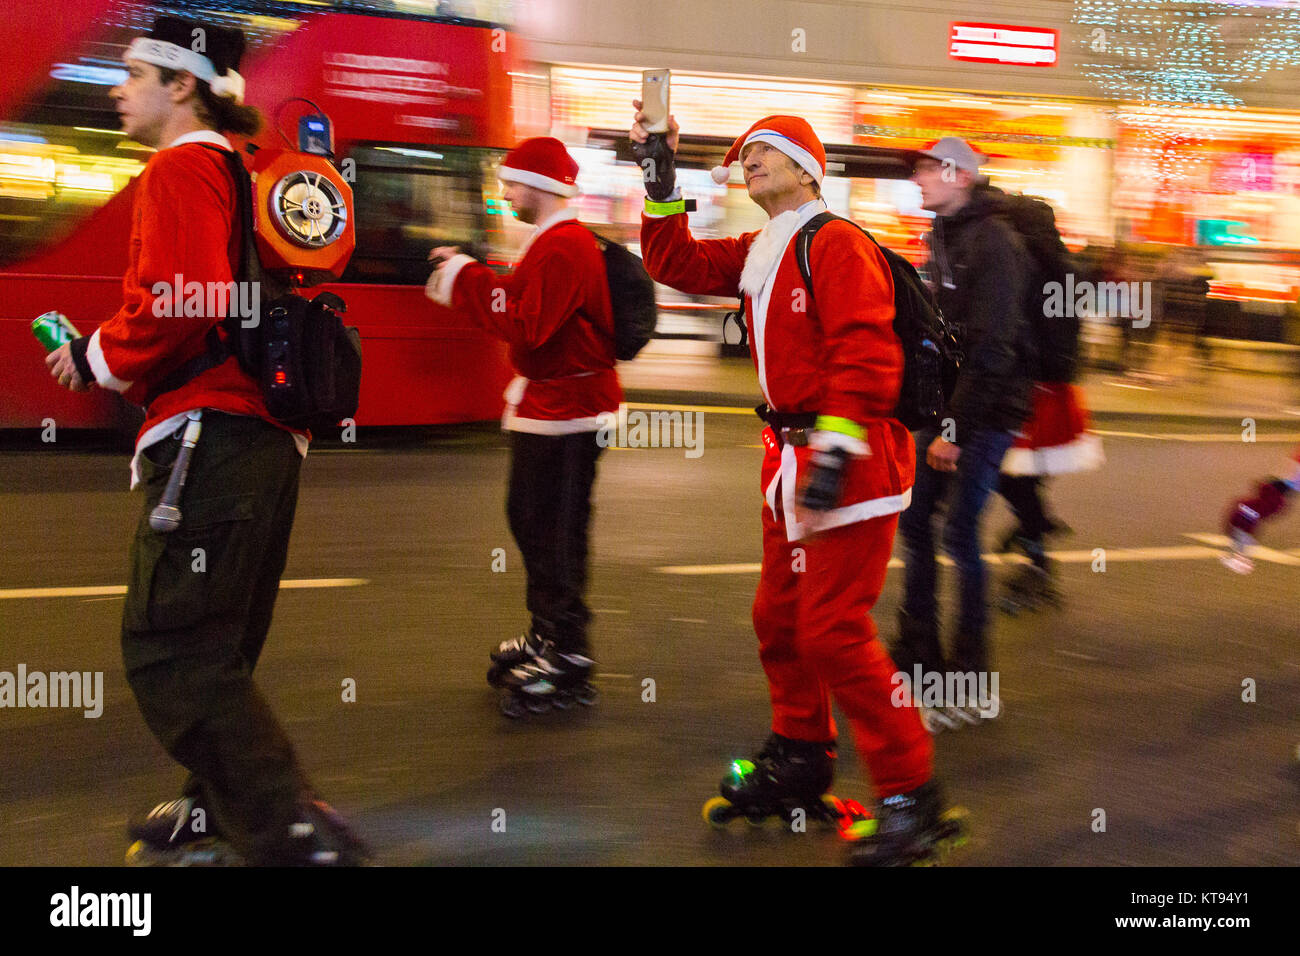 London, UK. 23rd Dec, 2017. A horde of rollerblading Santas skate down Oxford Street as shoppers crowd London on the second last shopping days before Christmas. Credit: Paul Davey/Alamy Live News Stock Photo